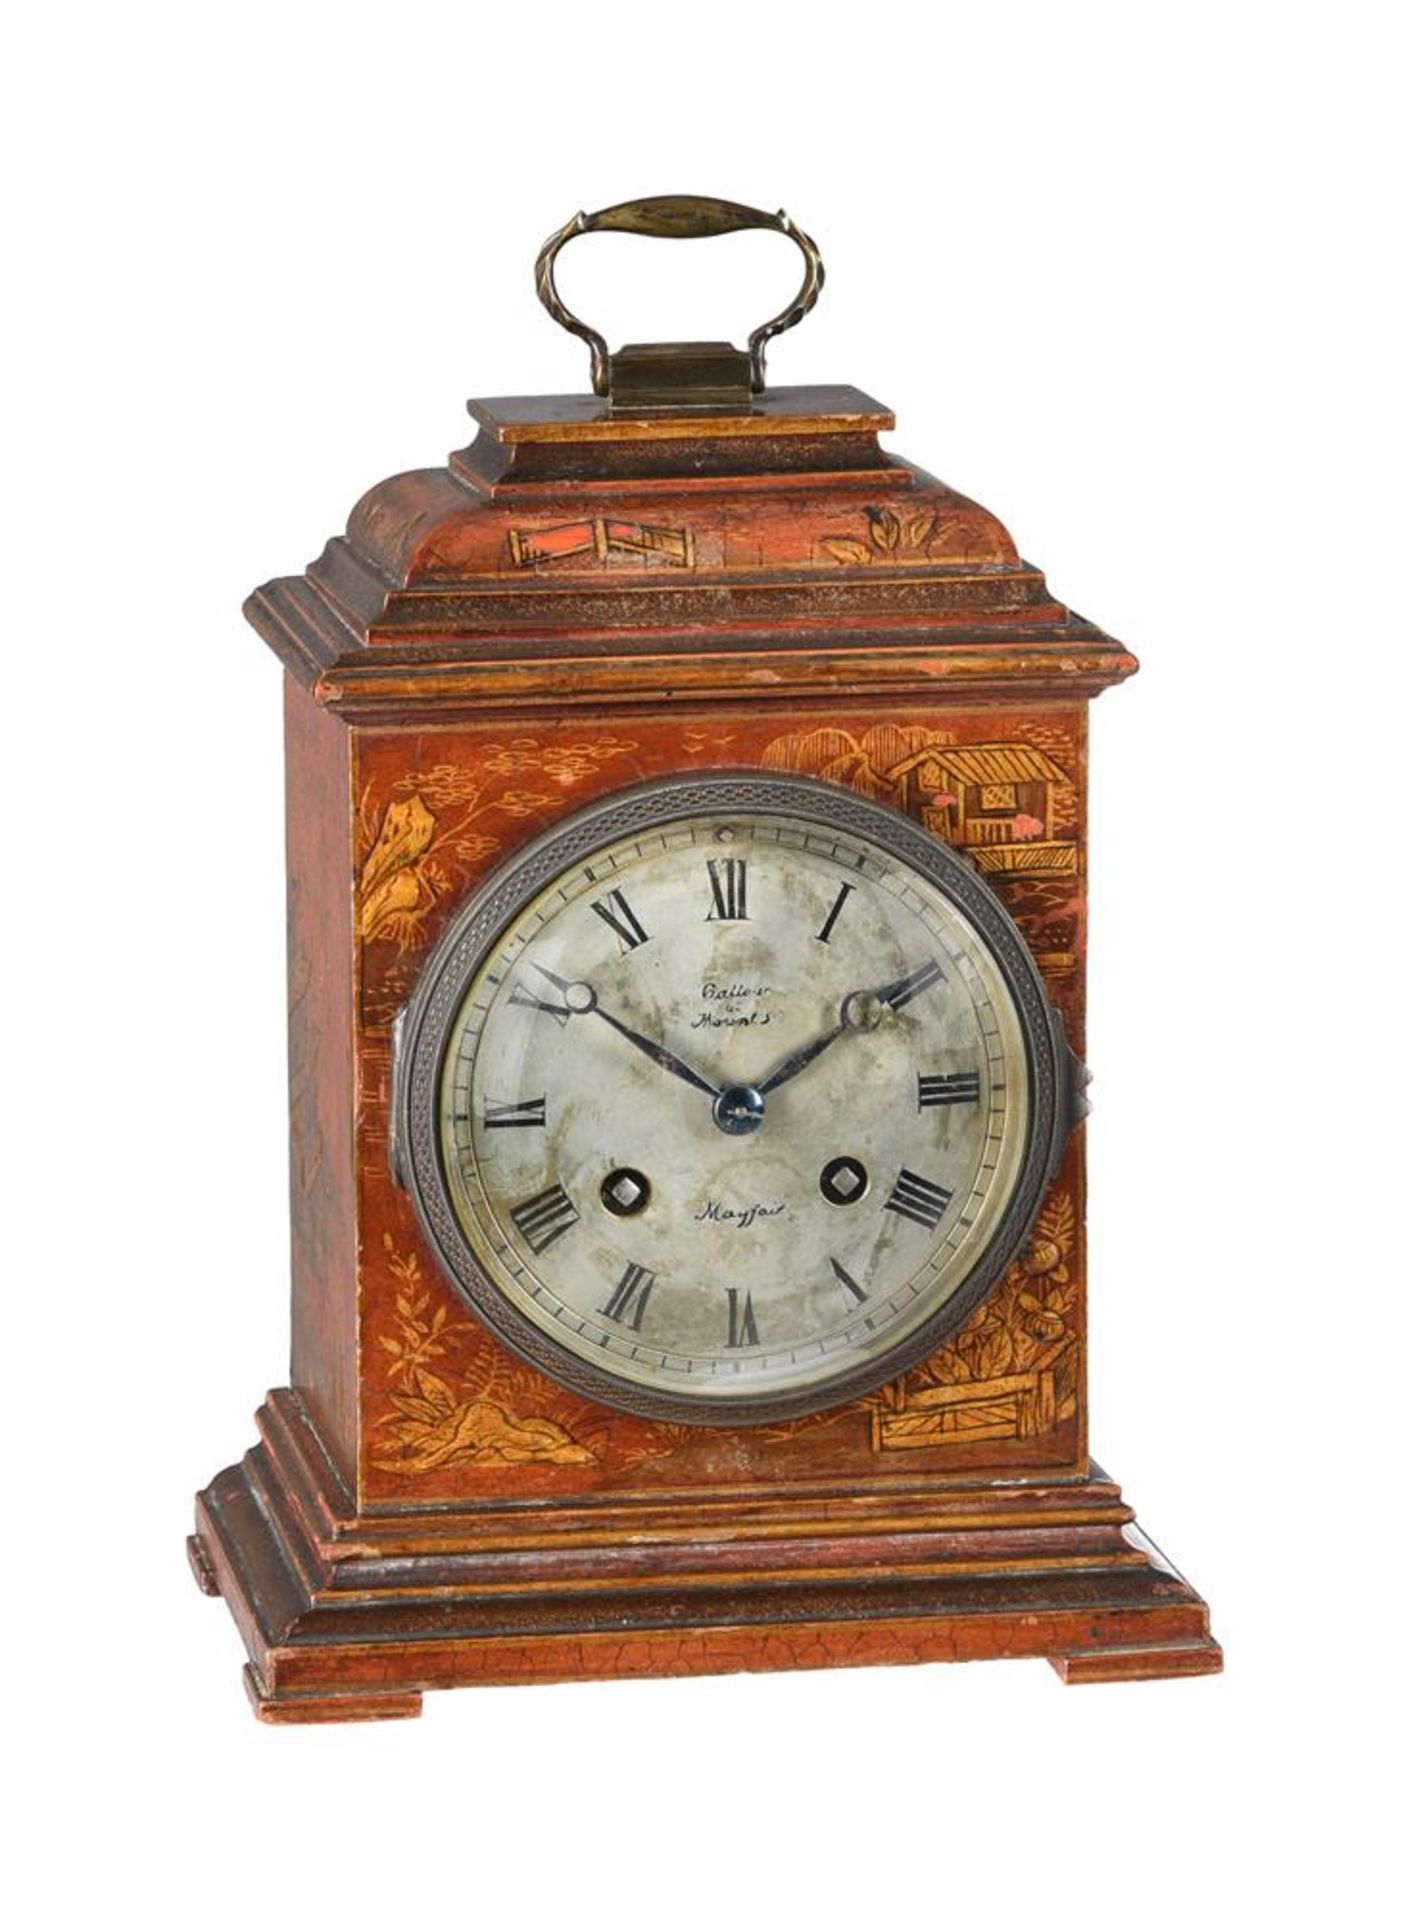 AN EDWARDIAN RED CHINOISERIE JAPANNED SMALL MANTEL/BRACKET CLOCK